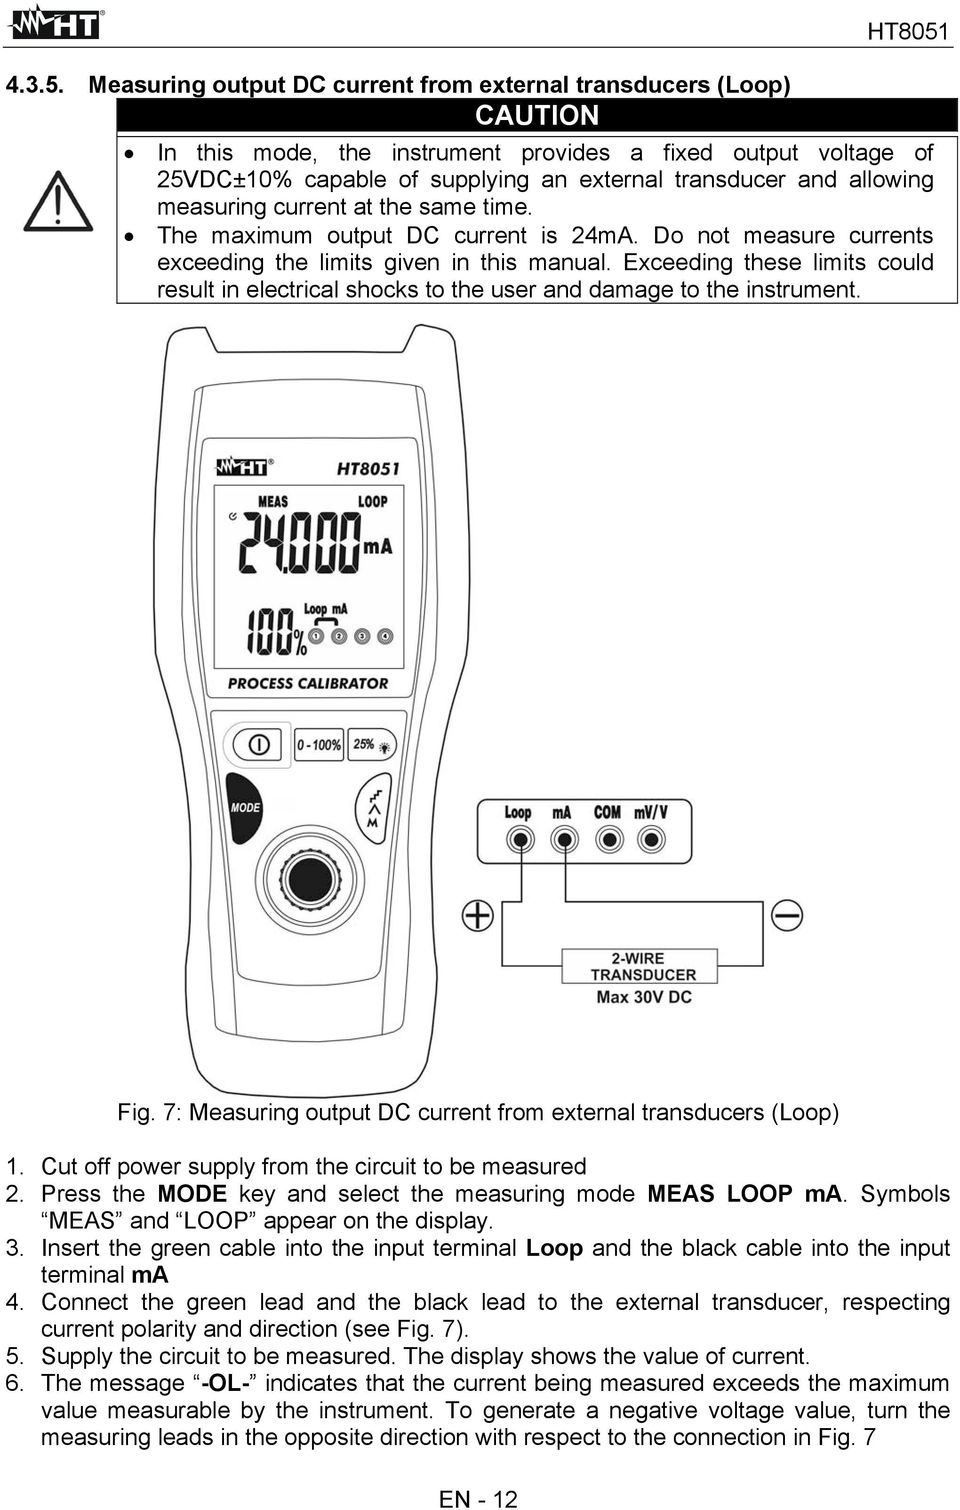 allowing measuring current at the same time. The maximum output DC current is 24mA. Do not measure currents exceeding the limits given in this manual.